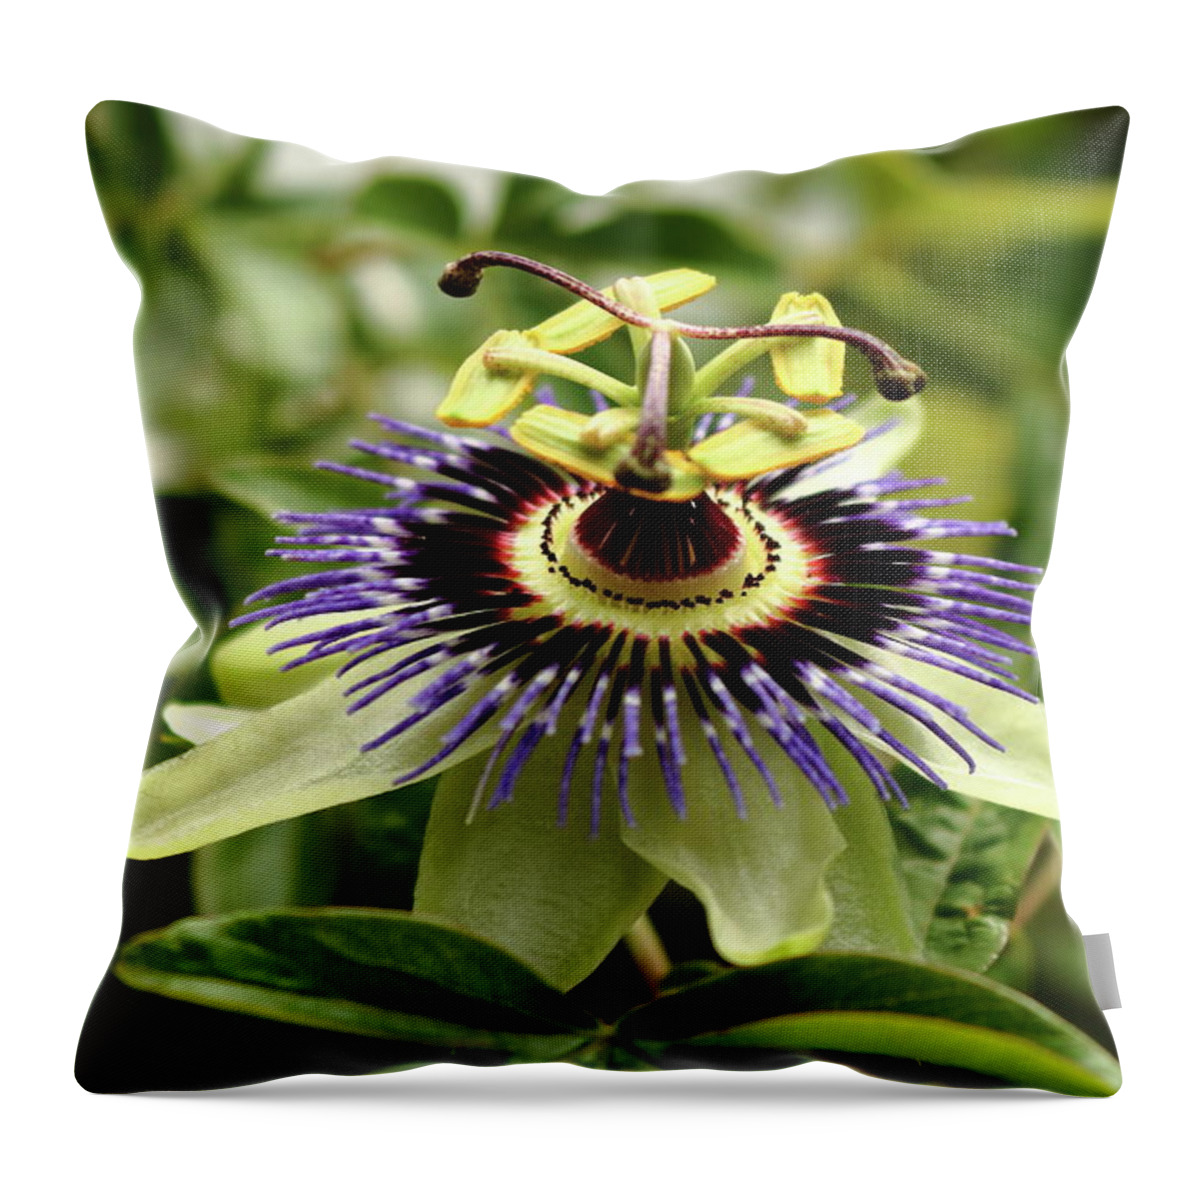 Passion Flower Gardening Horticulture Wall Plant Blue White Purple Green Passiflora Growing Climber Leaf Stem Sepals Throw Pillow featuring the photograph Passiflora. Passion flower by Jeff Townsend